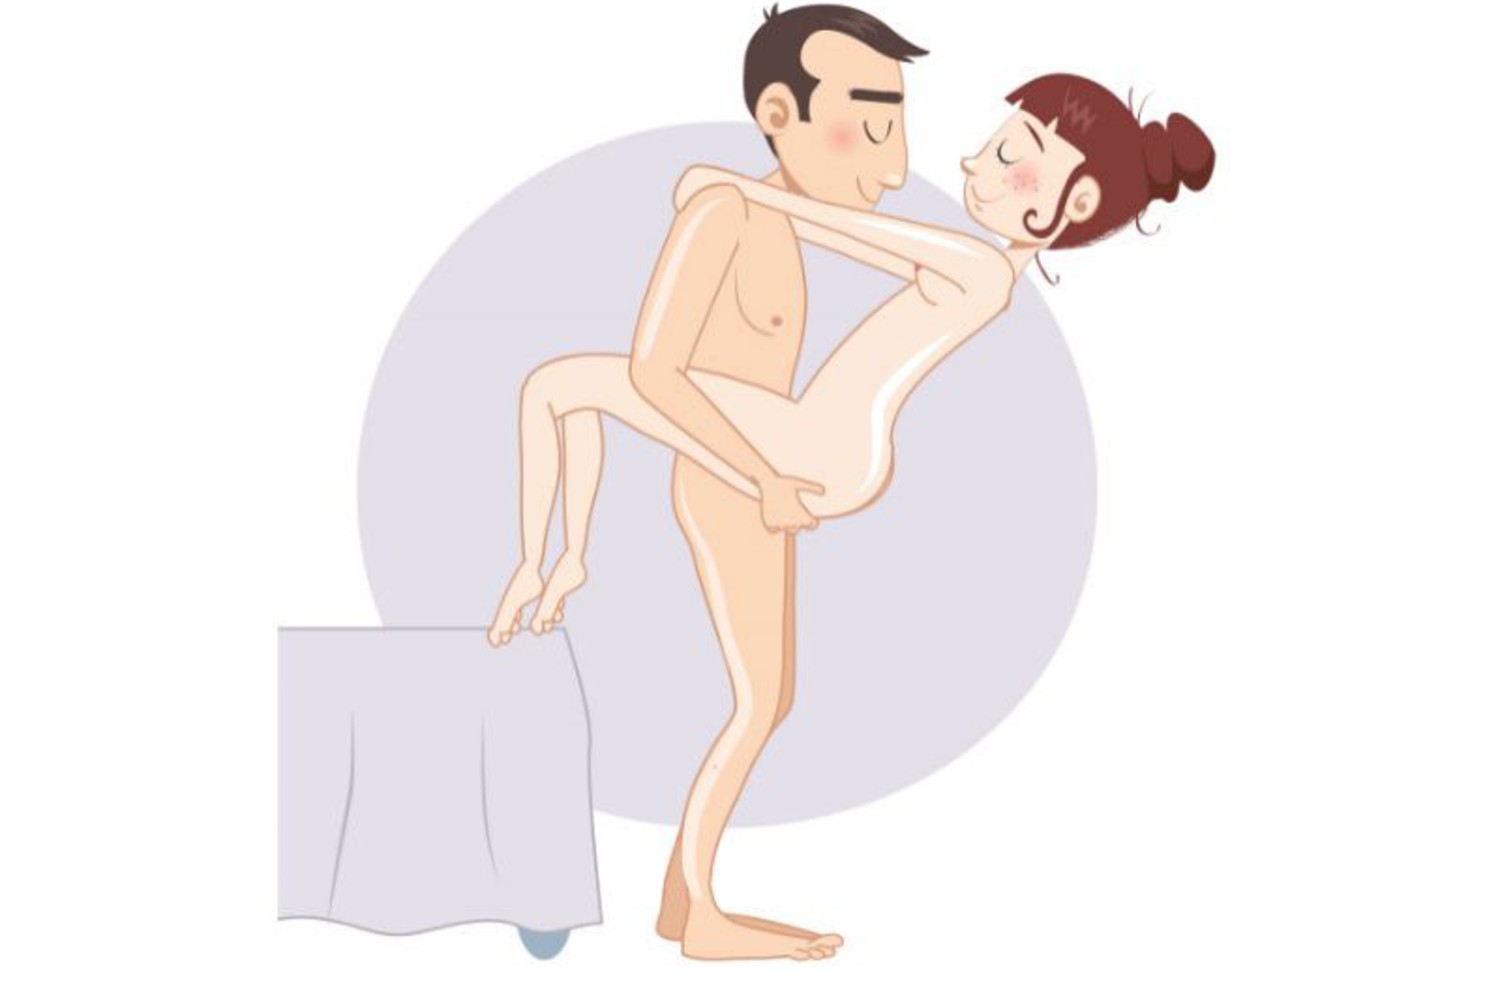 Oral sex postions for married partners